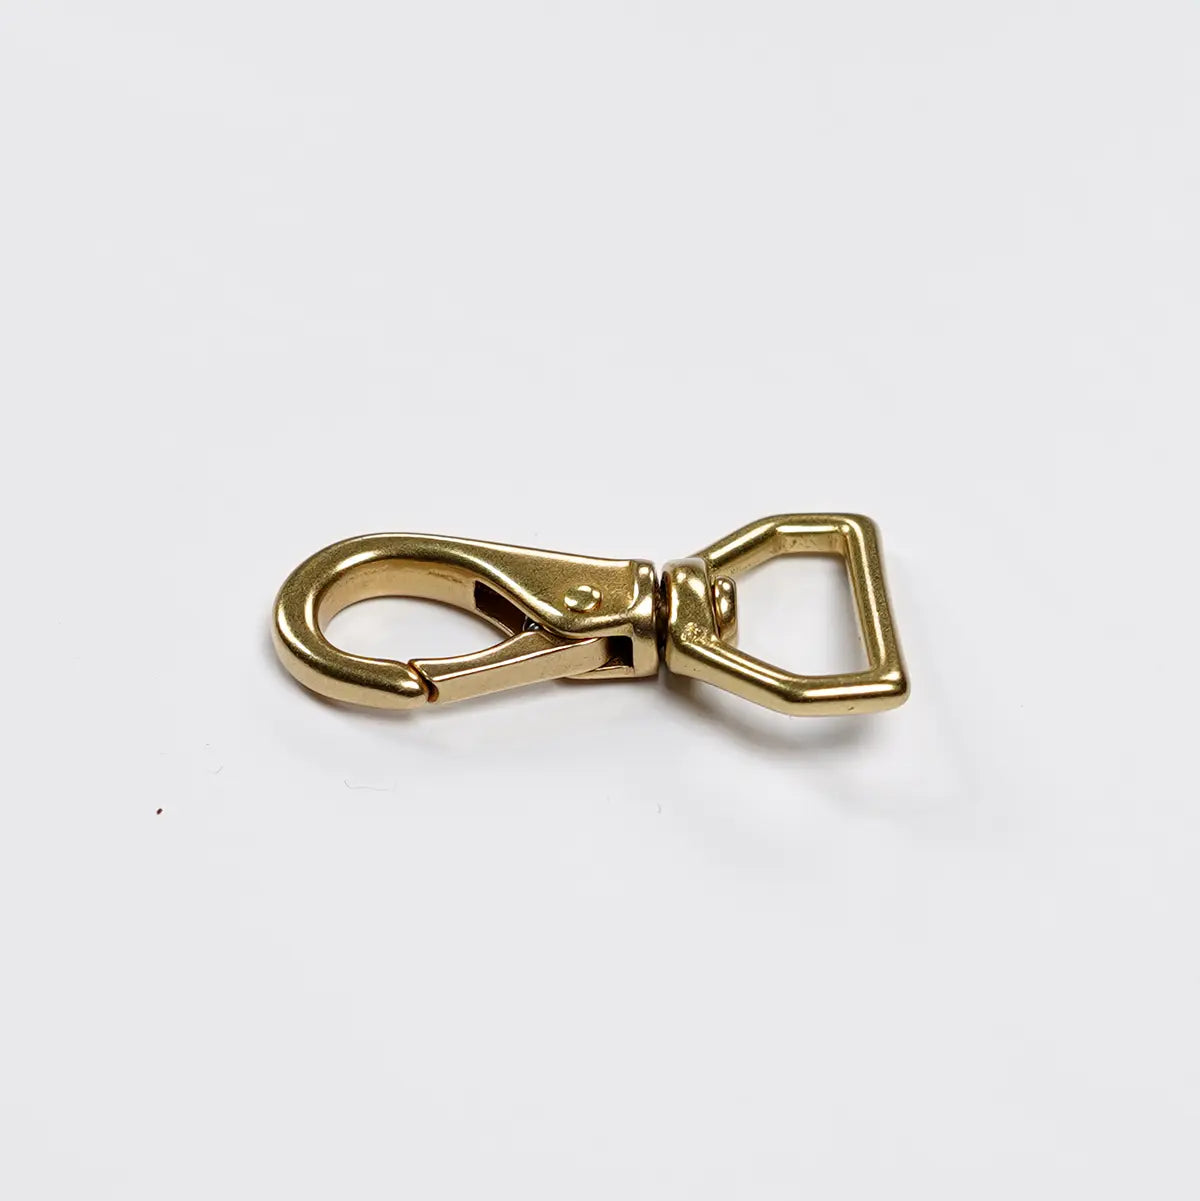 3/4" Small Swivel Snap Solid Brass